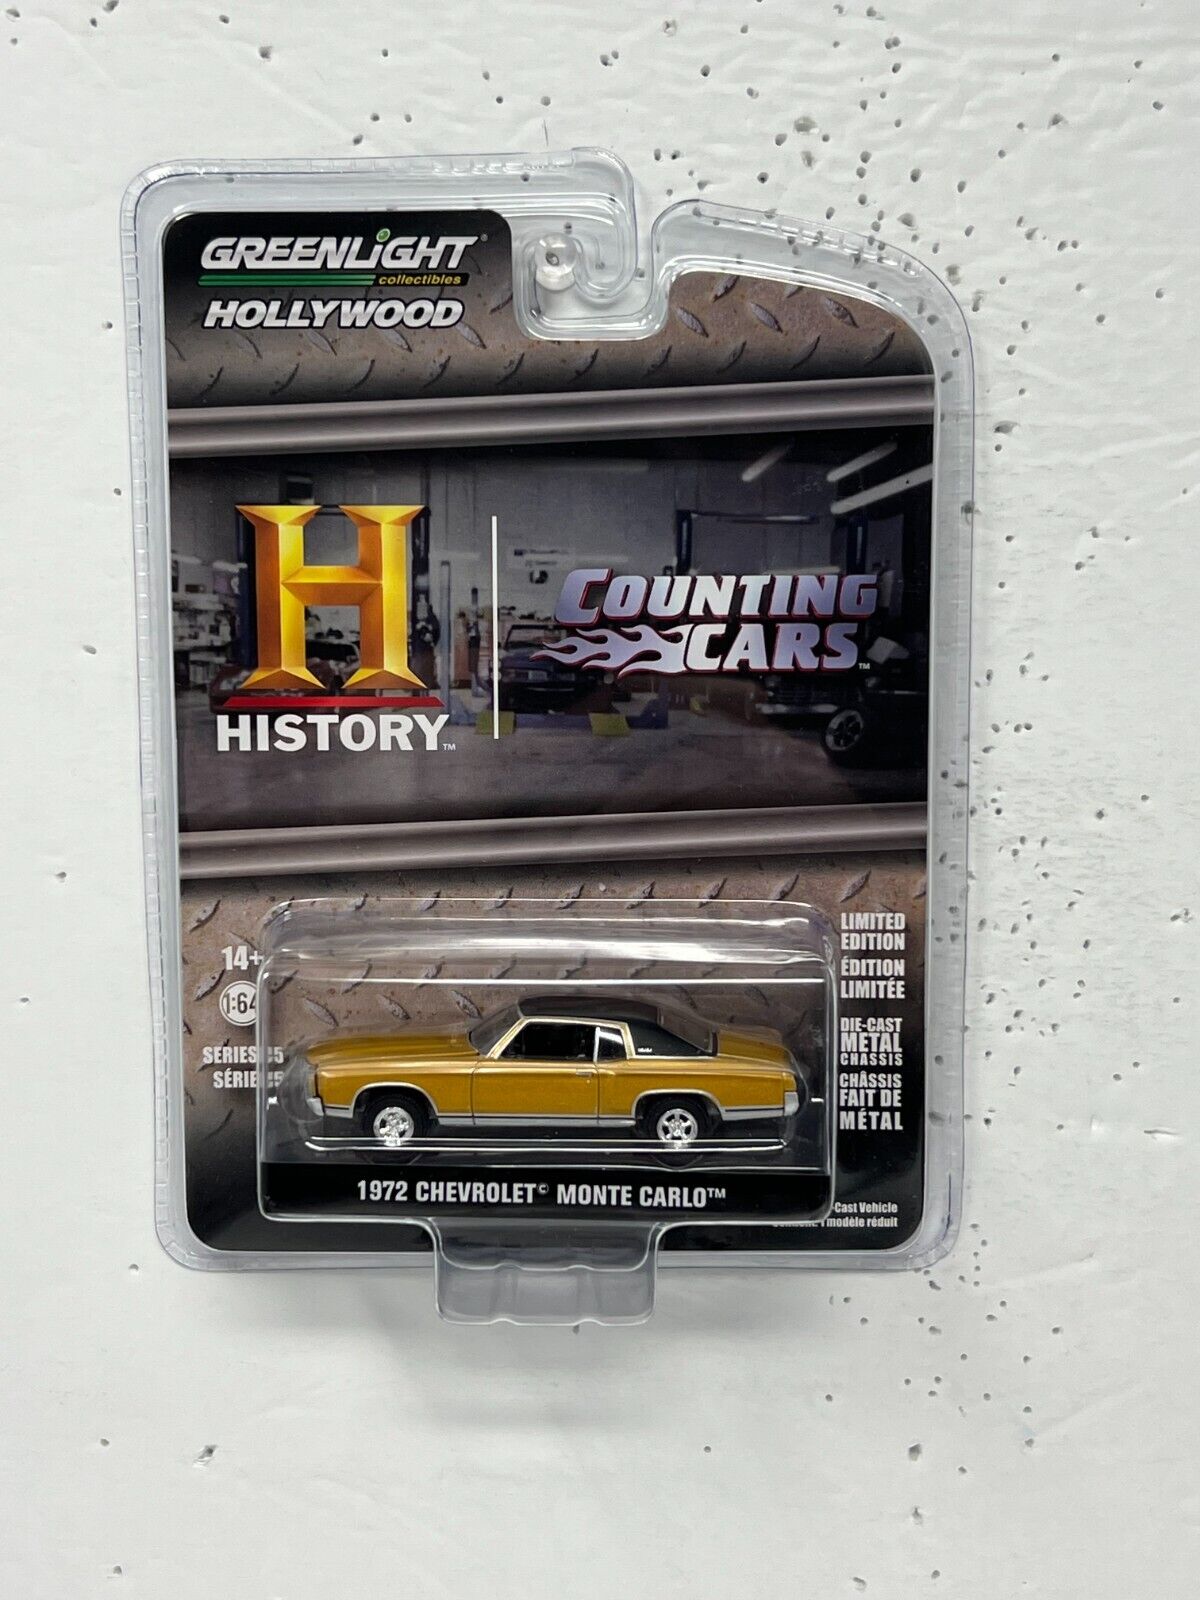 Greenlight Hollywood Counting Cars 1972 Chevrolet Monte Carlo 1:64 Diecast